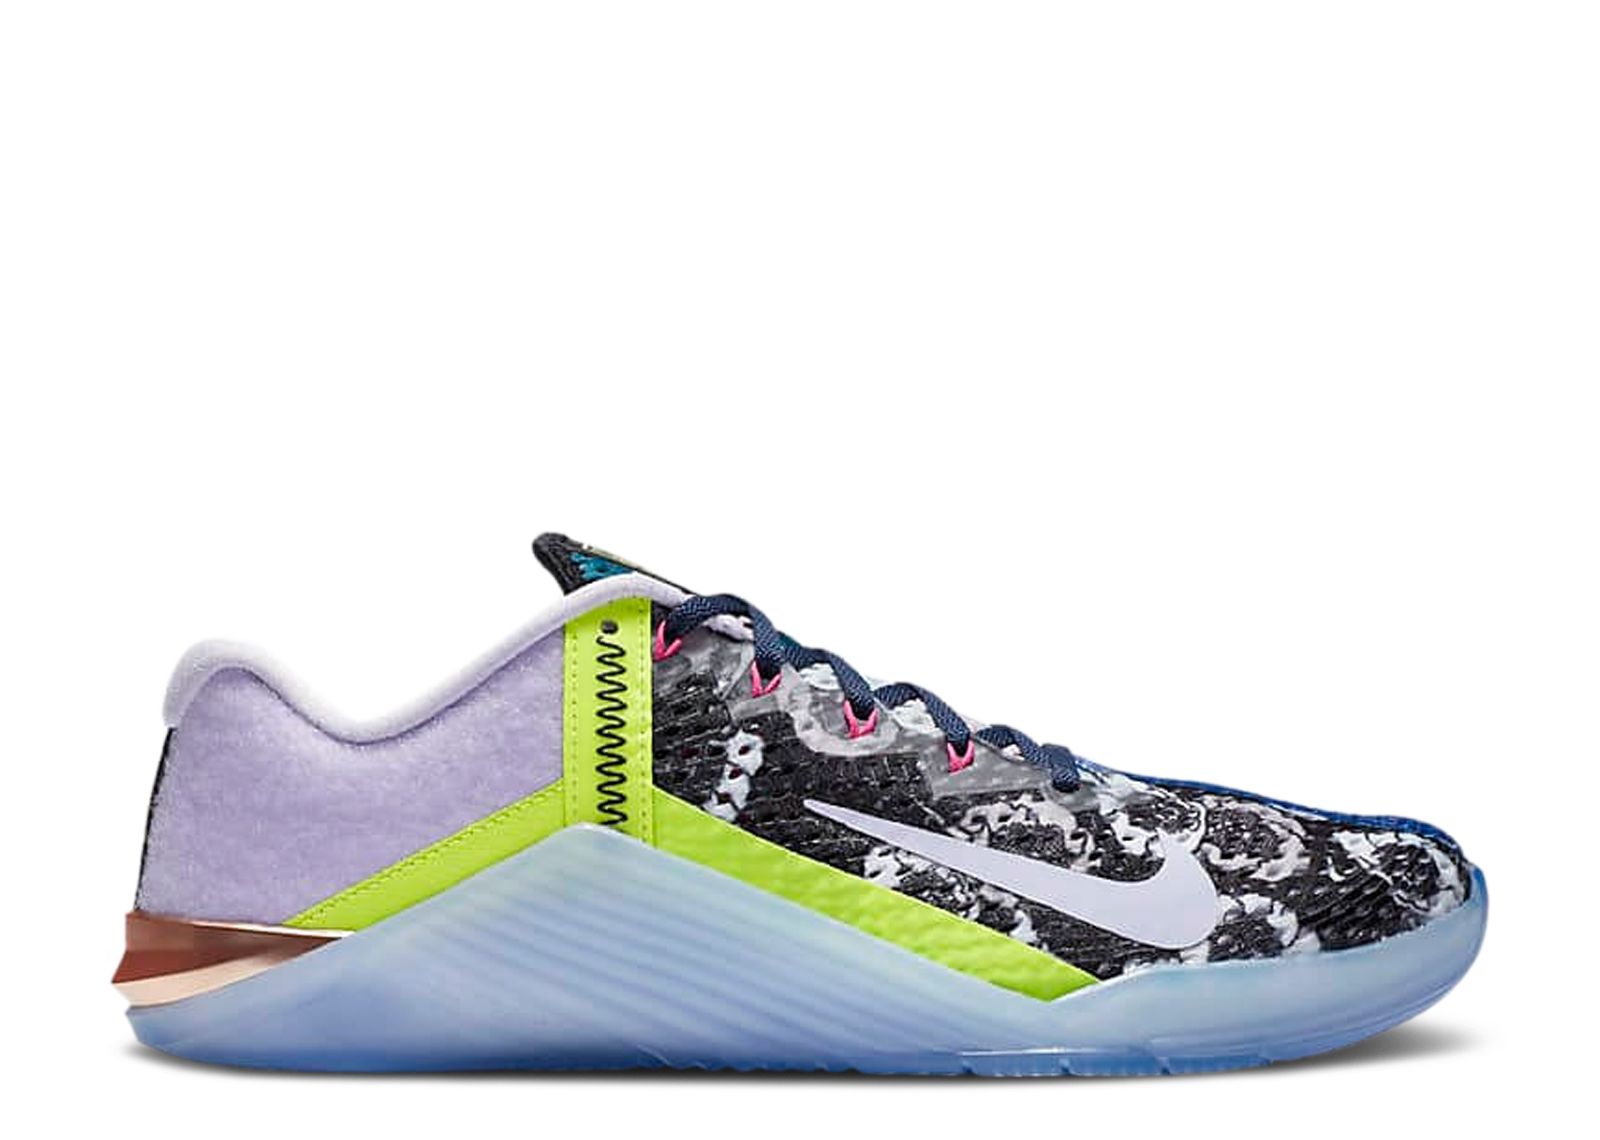 Metcon 6 X 'What The' - Nike CK9387 706 - volt/hyper punch/game | Club